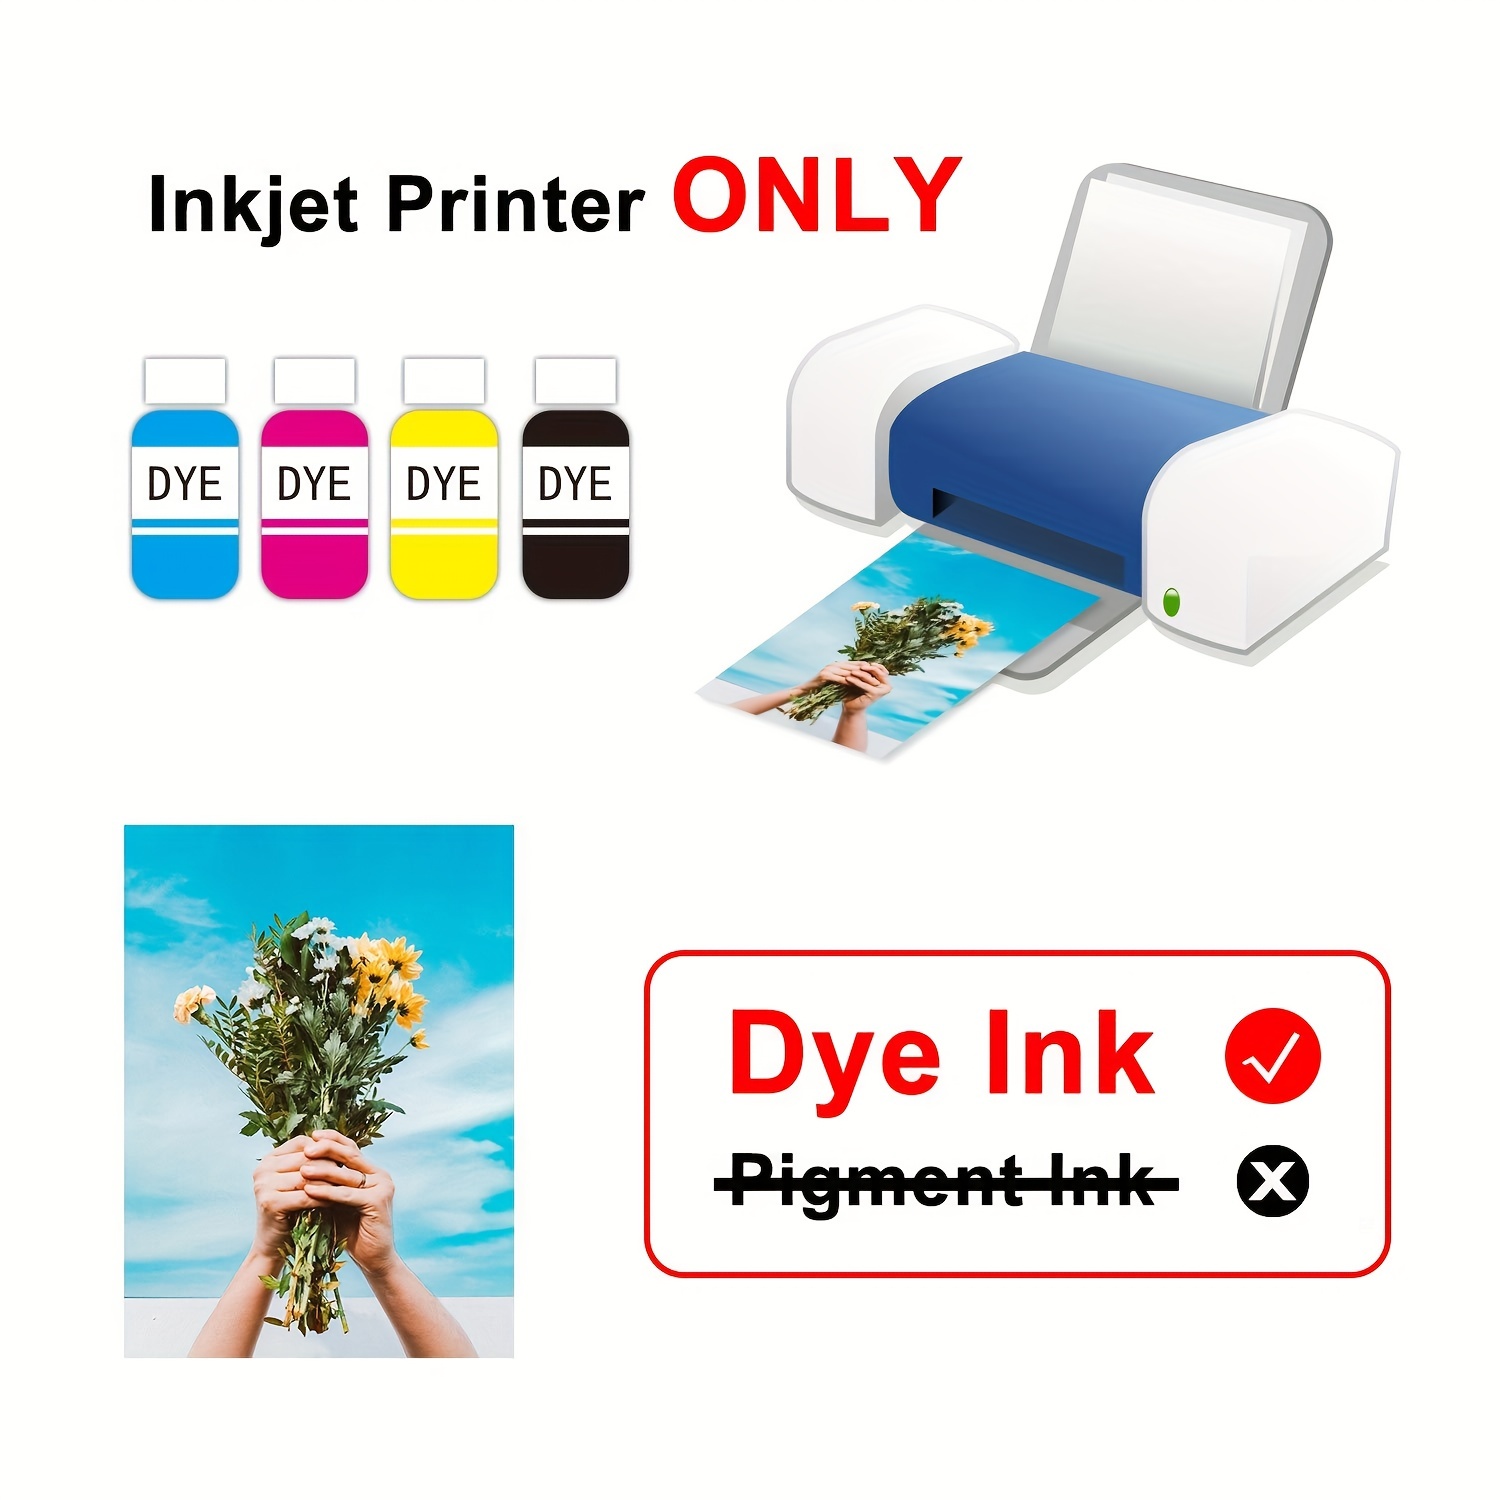  Koala Glossy Paper and Glossy Sticker Paper for Inkjet  Printers : Office Products